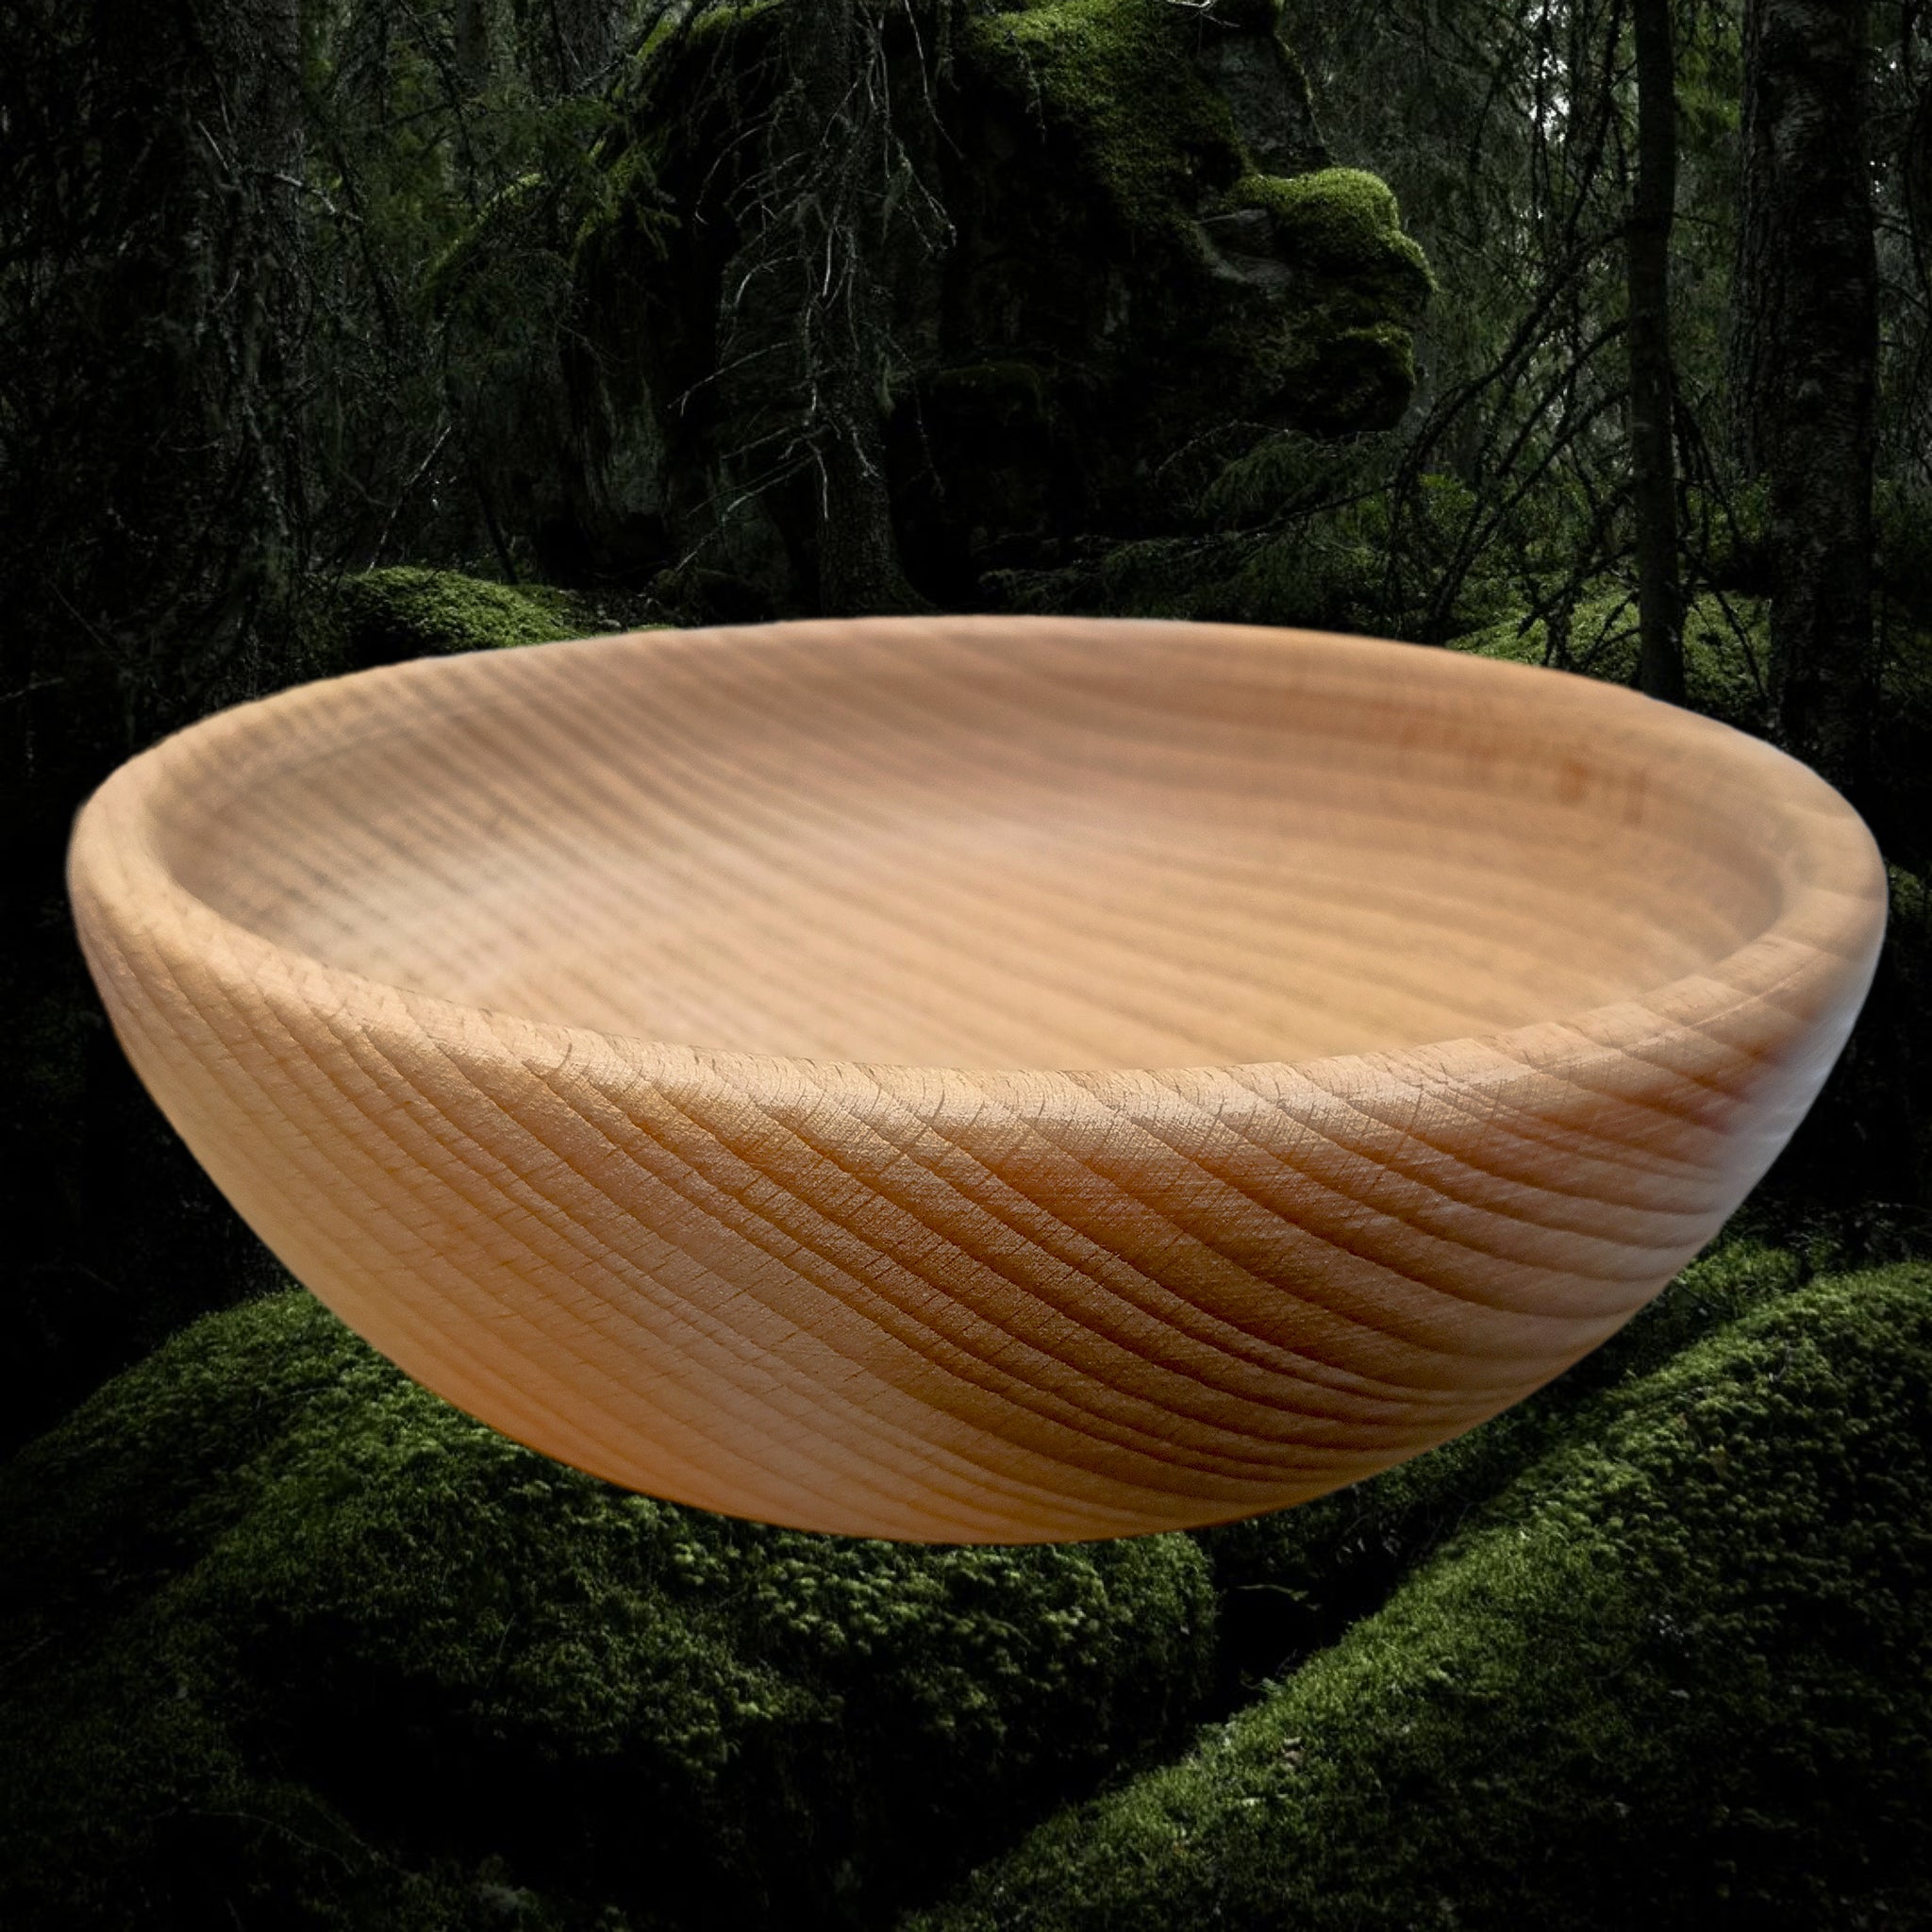 Large, Hand-Turned Medieval Wooden Bowl - Side View